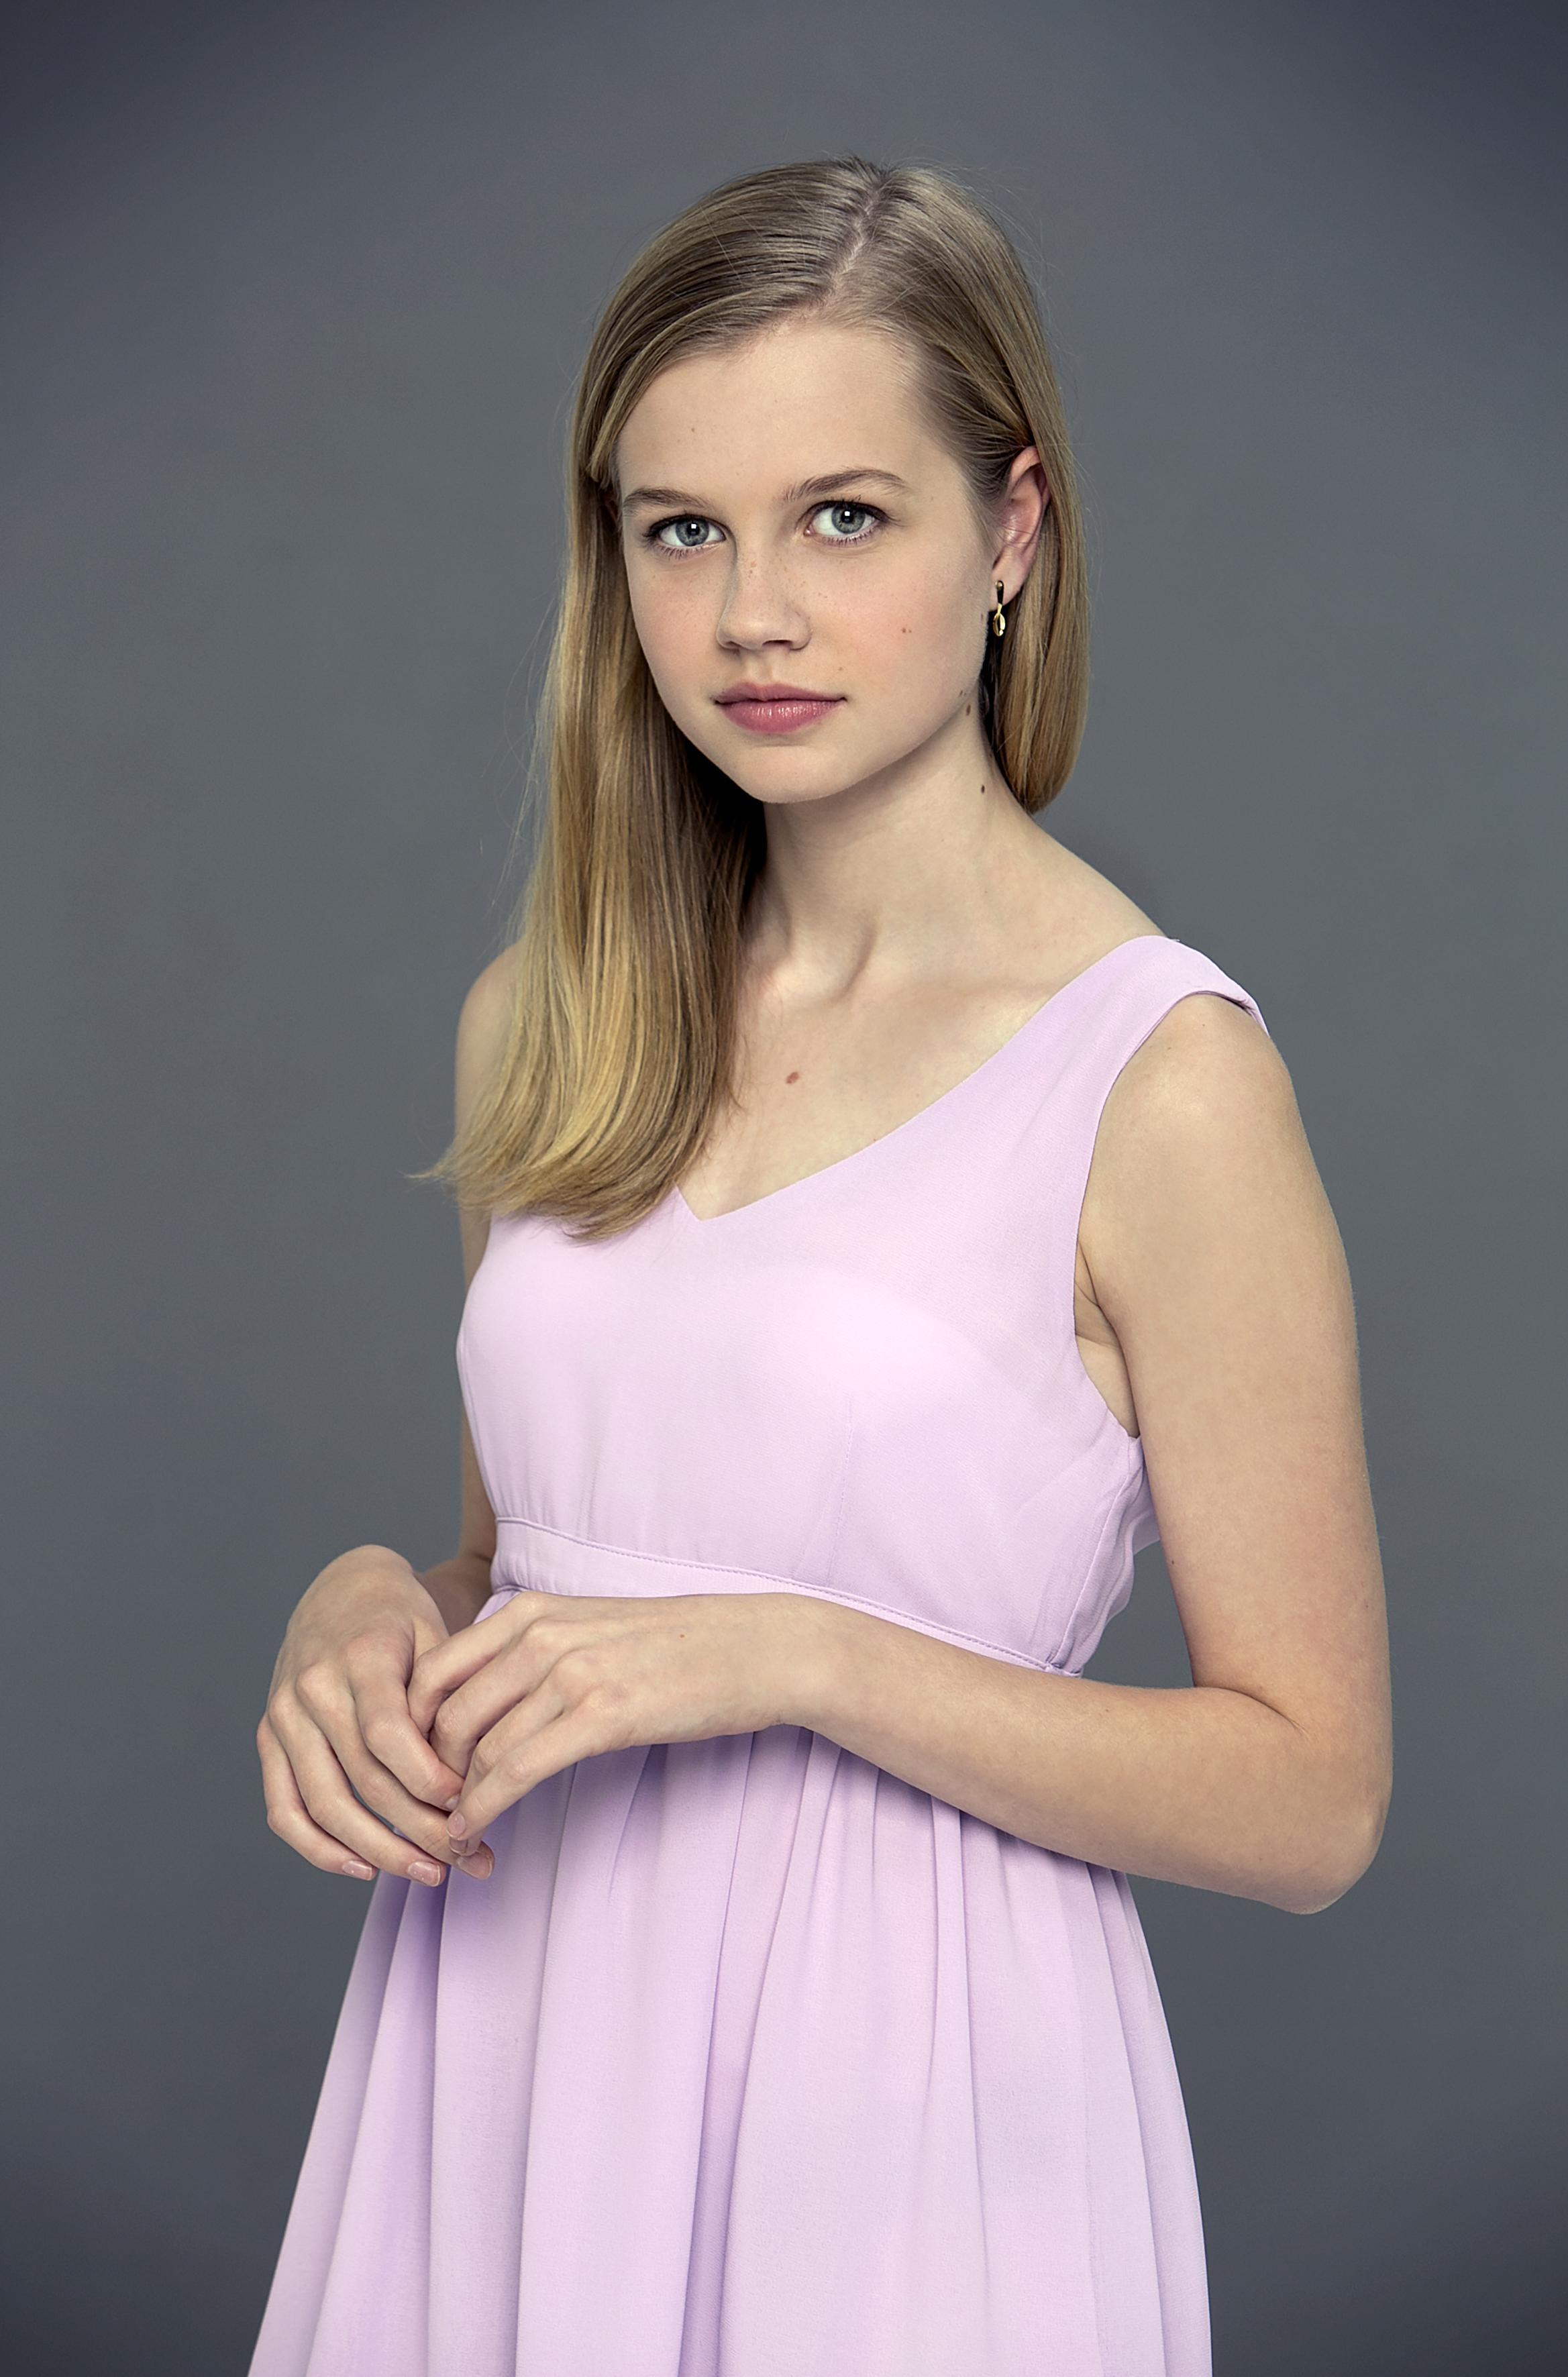 Actress Angourie Rice 2021 Wallpapers